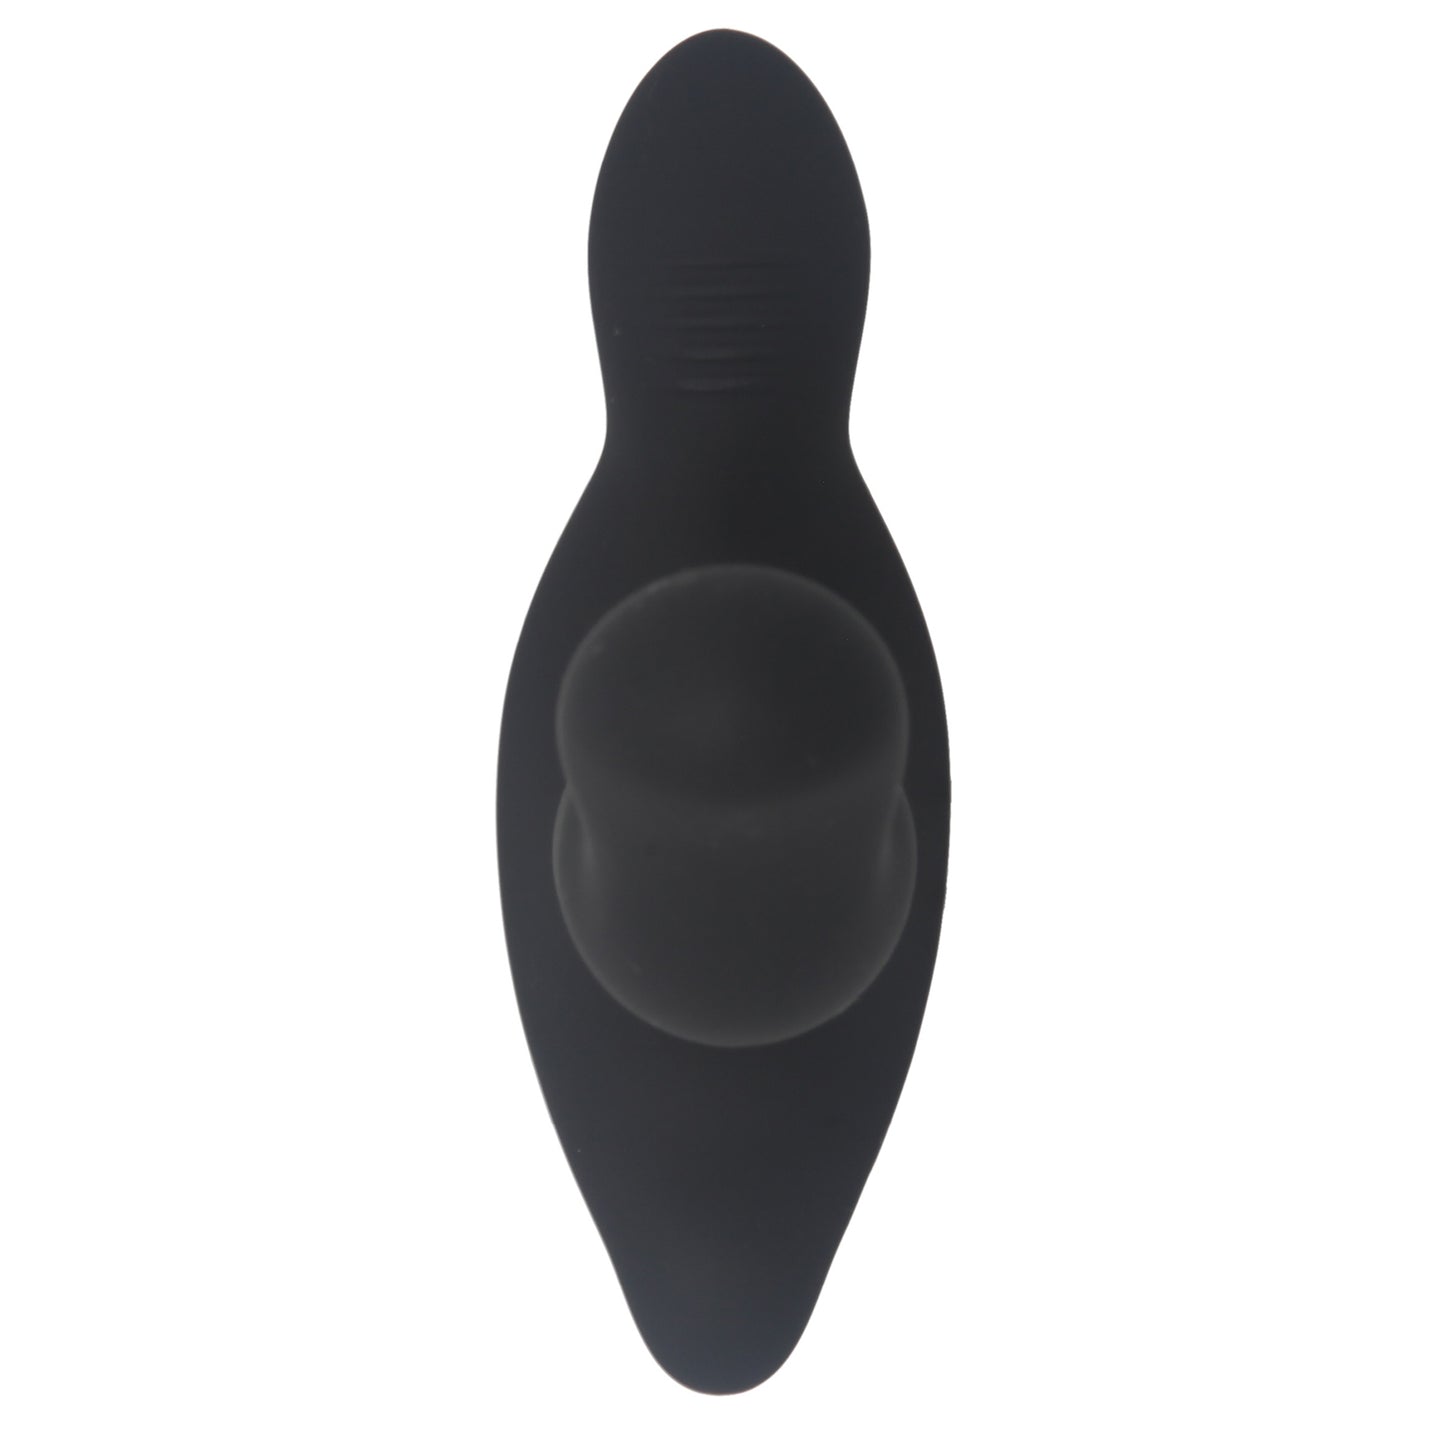 Wade Remote Control Prostate Massager